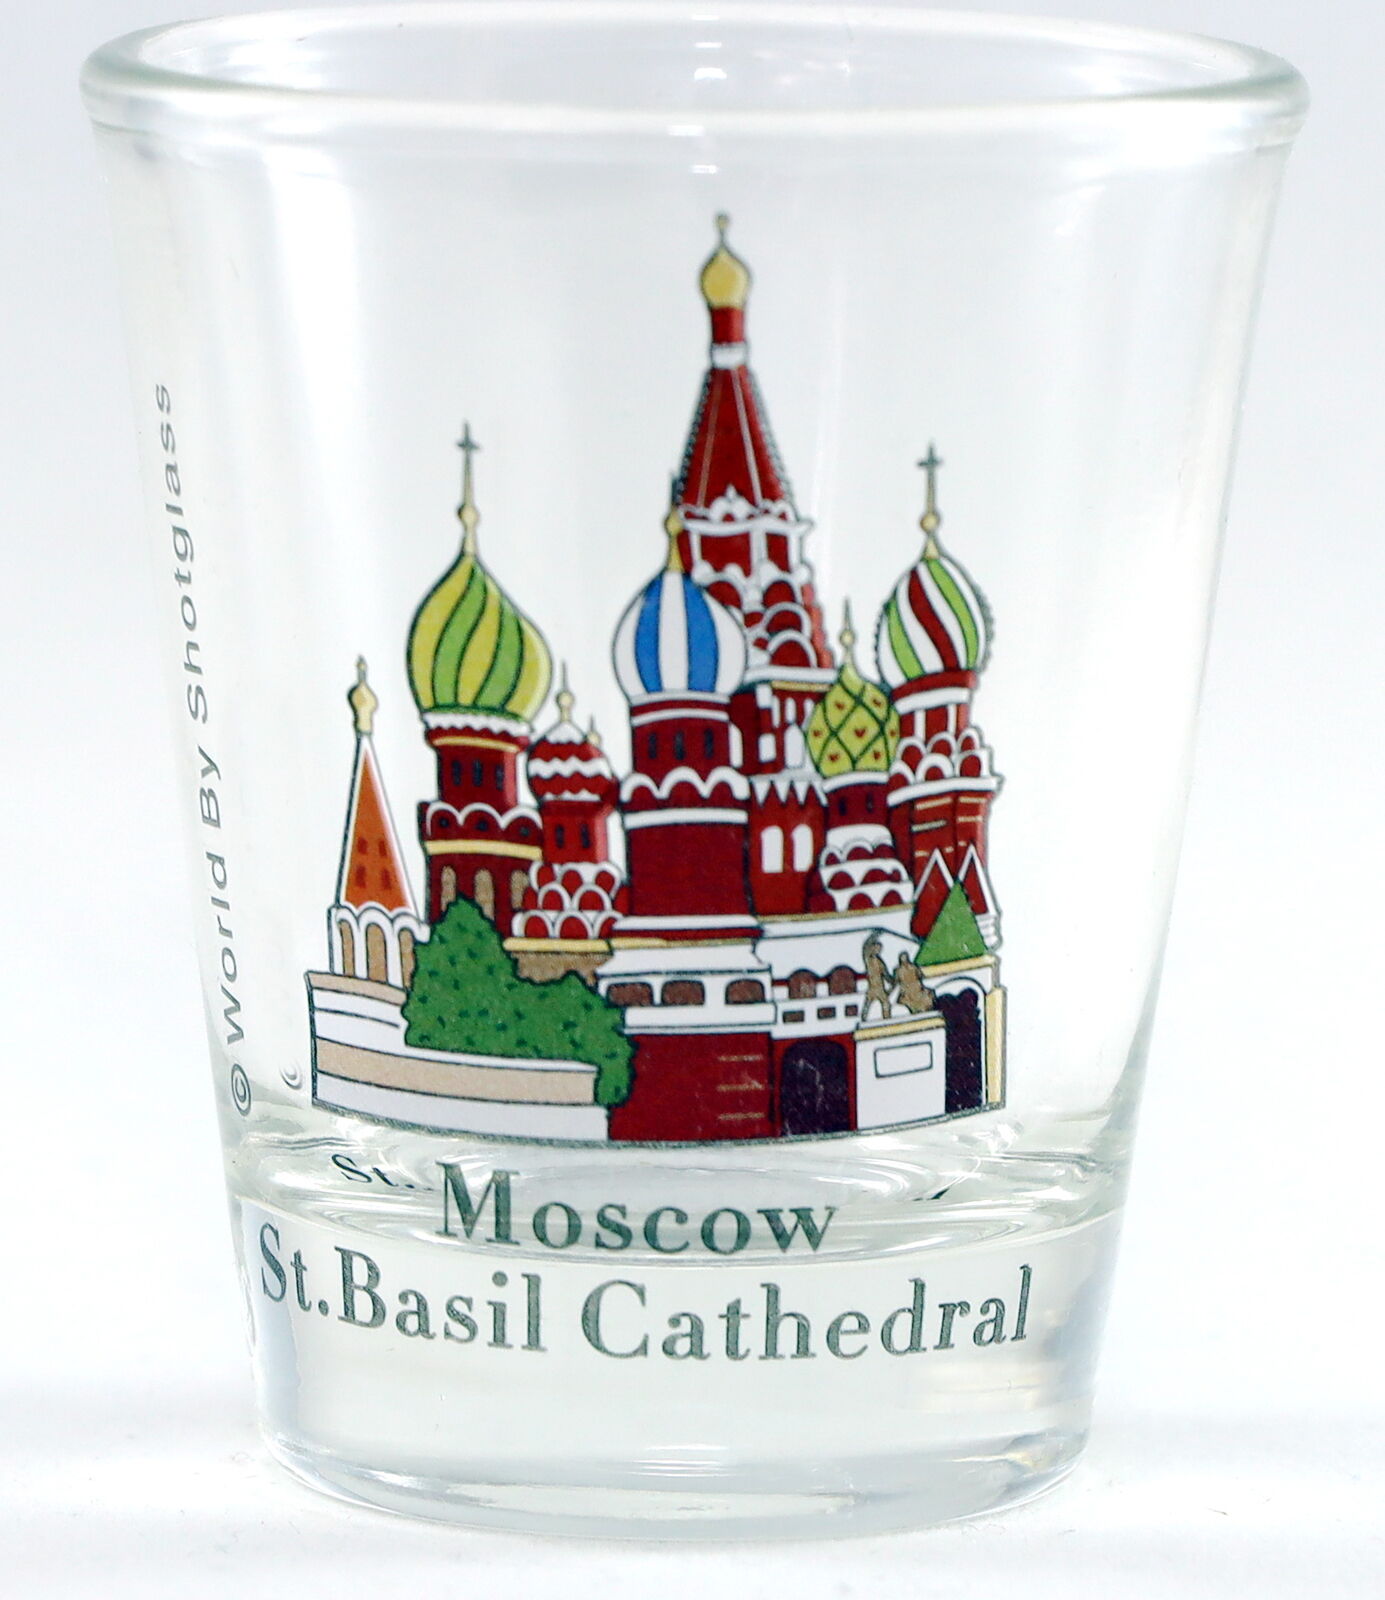 MOSCOW RUSSIA ST.BASIL CATHEDRAL SHOT GLASS